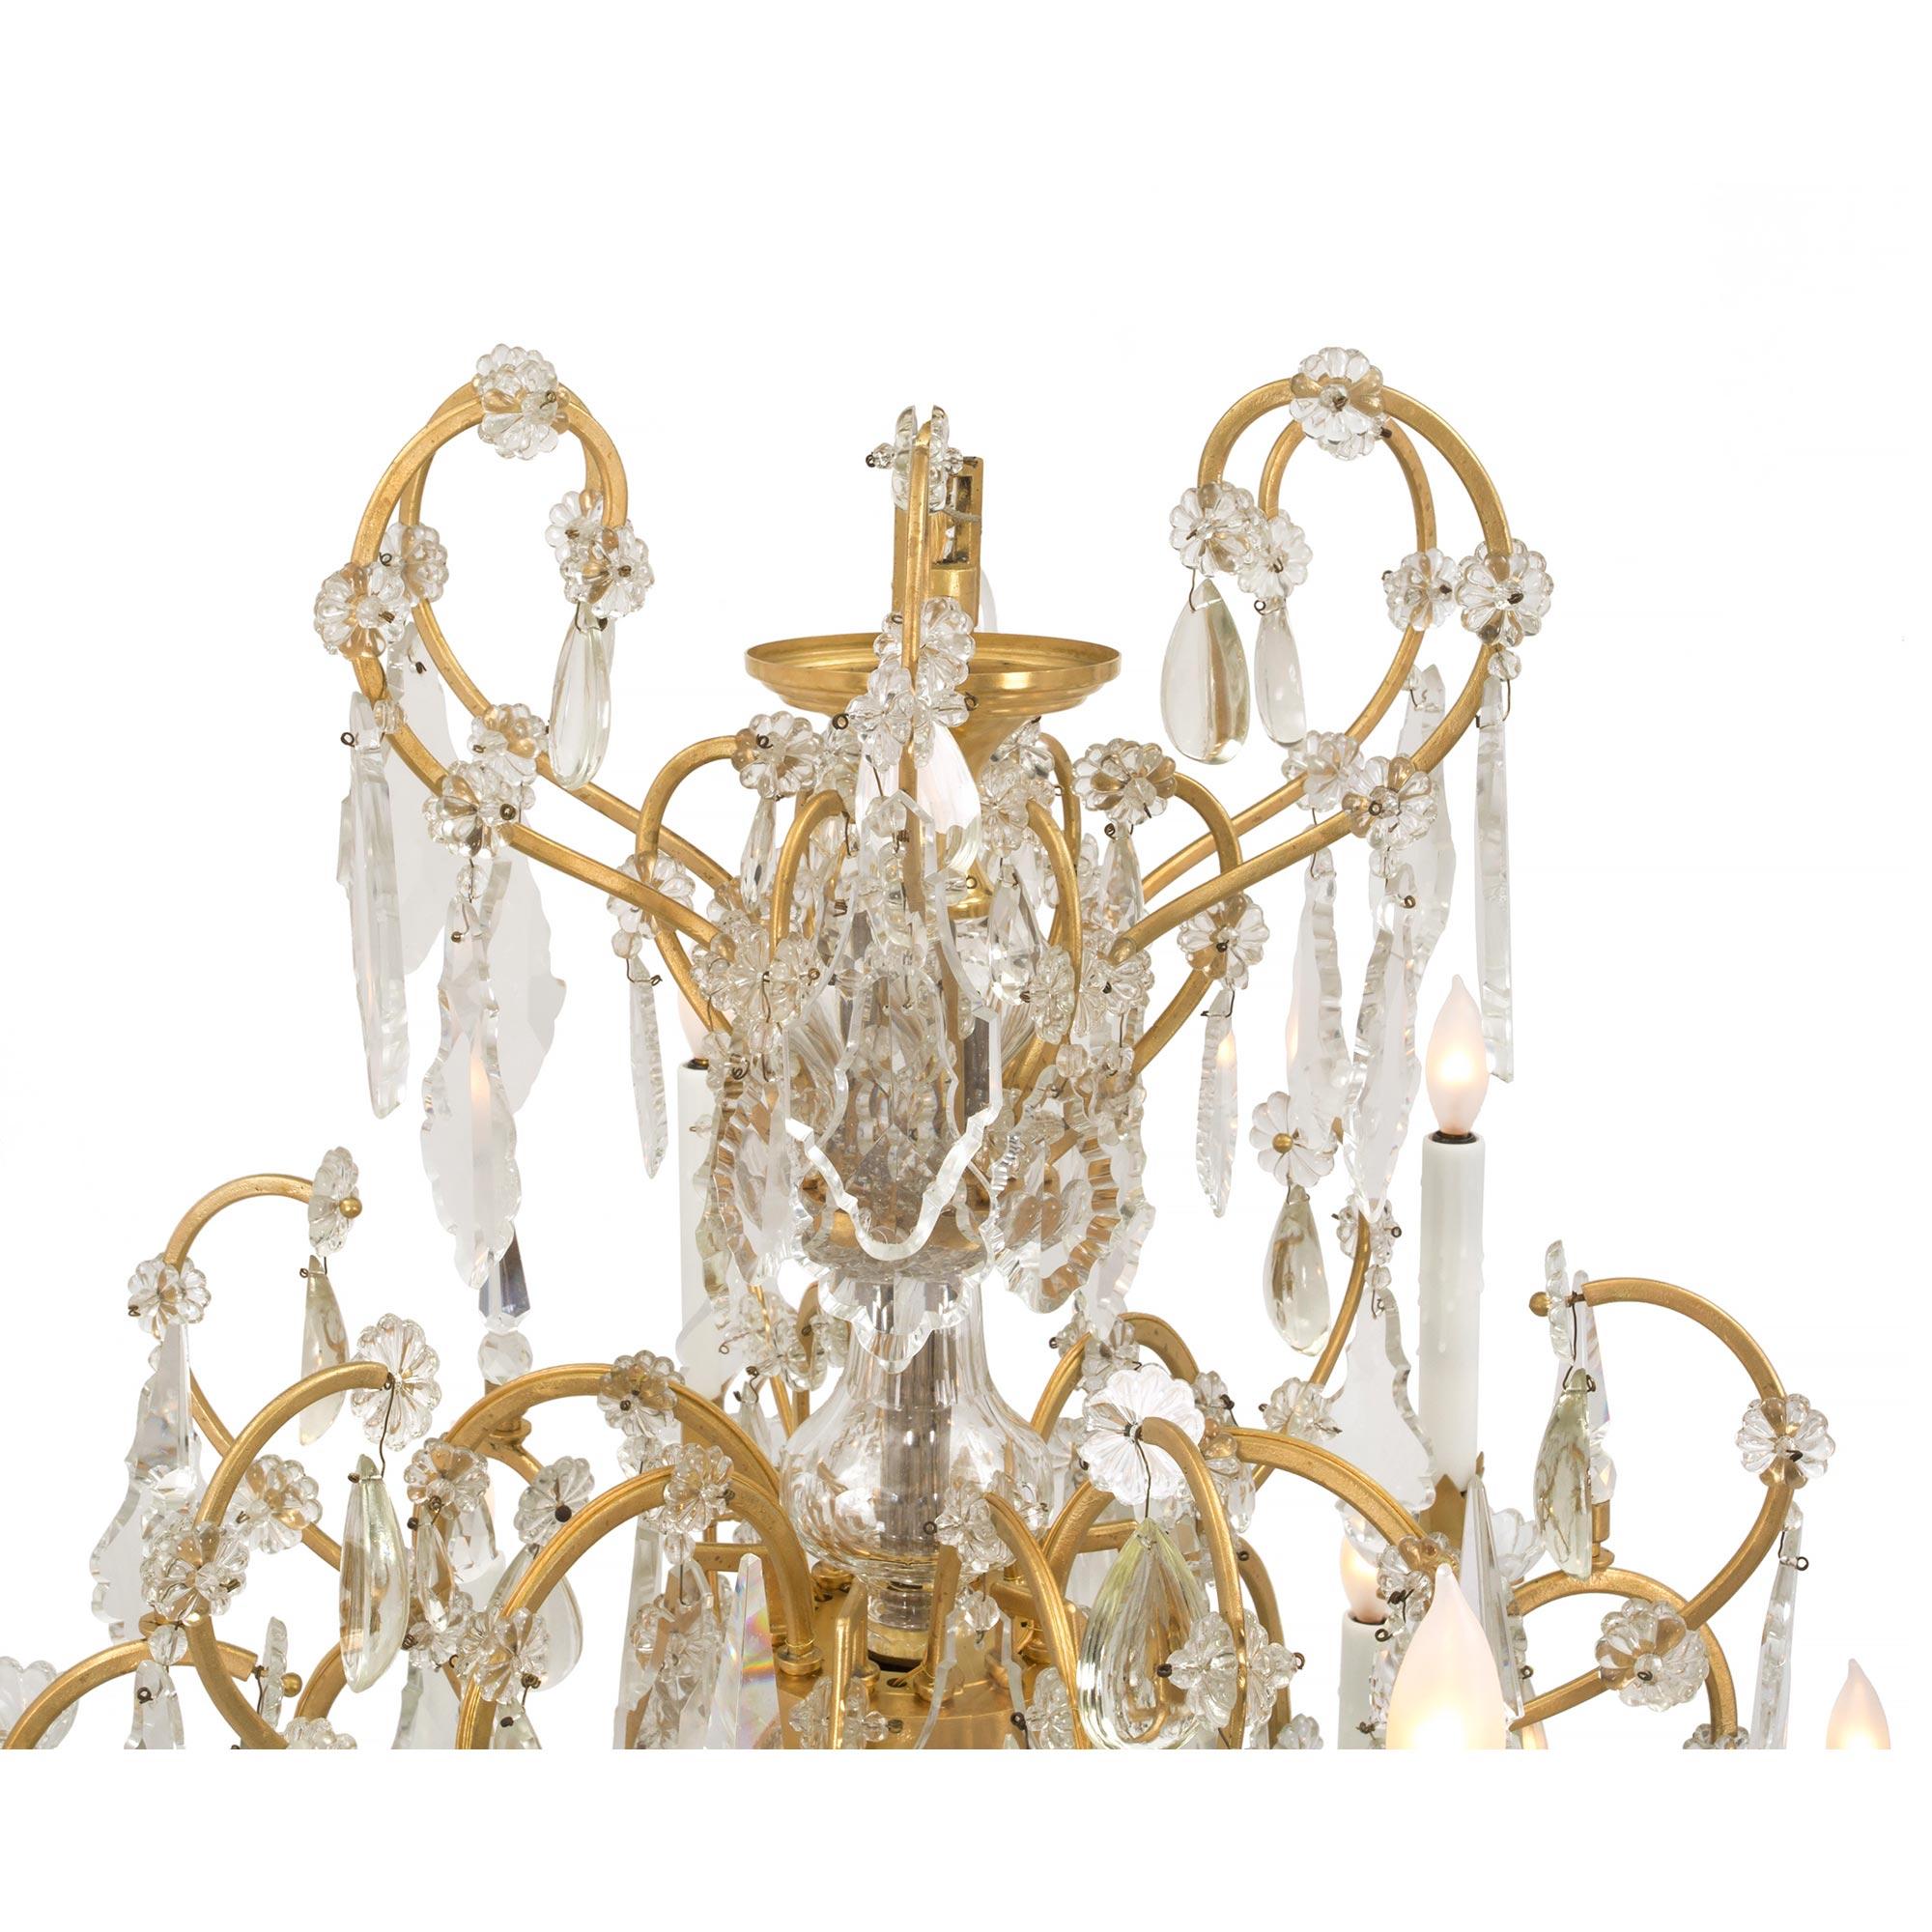 A stunning Italian 19th century Louis XVI st. ormolu and Baccarat crystal eighteen arm chandelier. The chandelier is centered by a fine crystal ball and six scrolled arms with beautiful alternating cut crystal pendants and crystal daggers. The